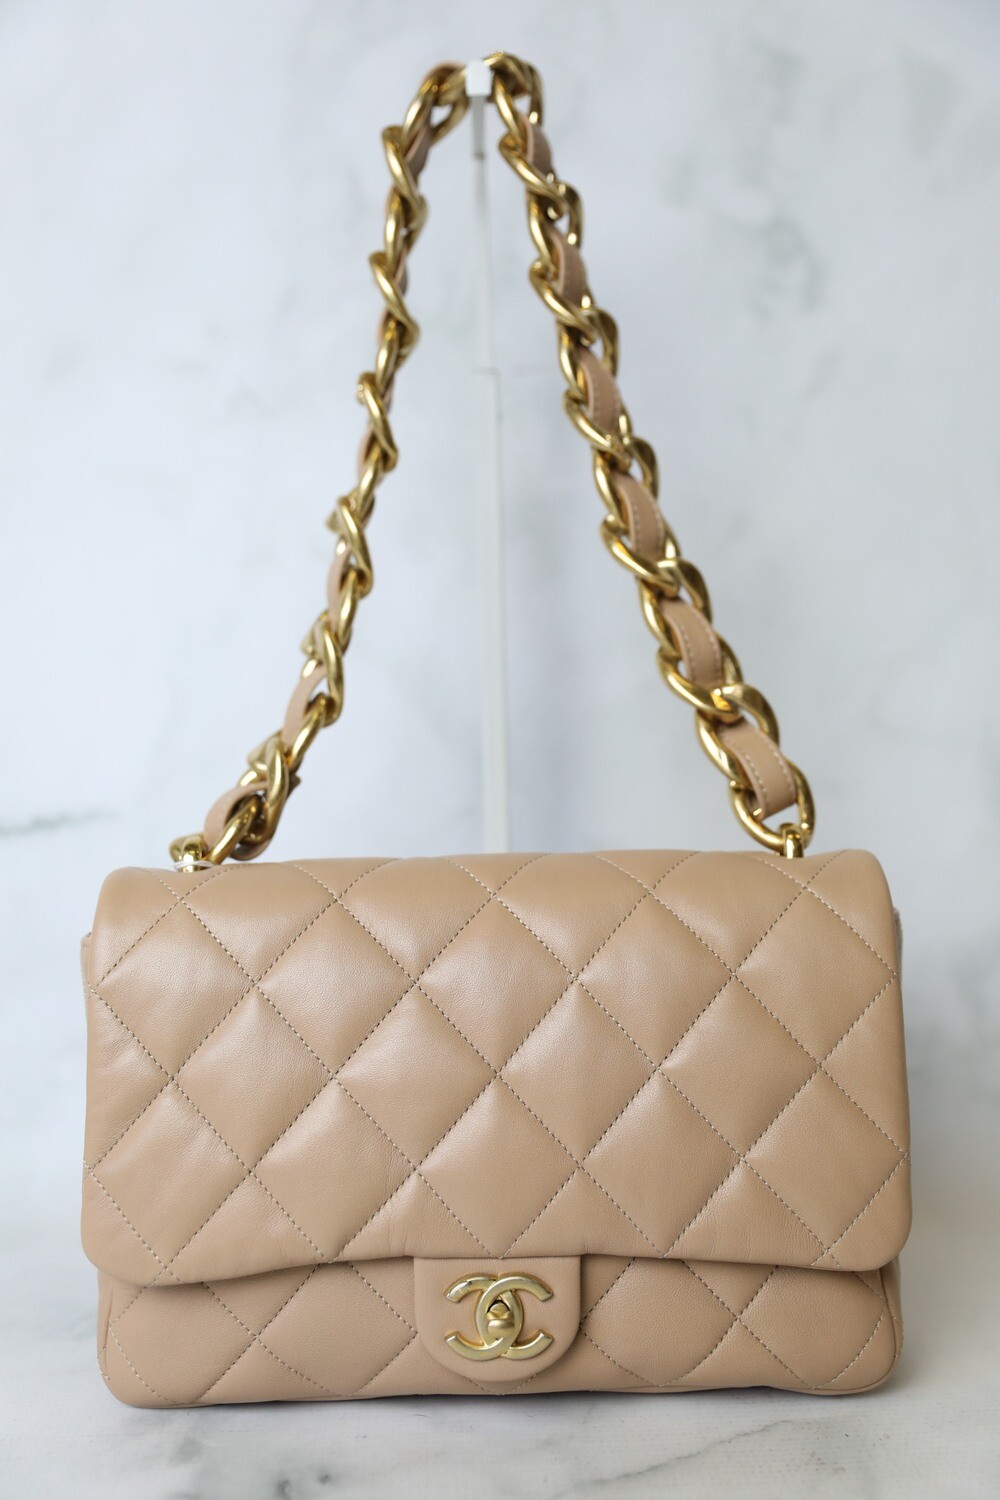 Chanel Funky Town Flap Large, Beige Lambskin with Gold Hardware, Preowned  in Box WA001 - Julia Rose Boston | Shop